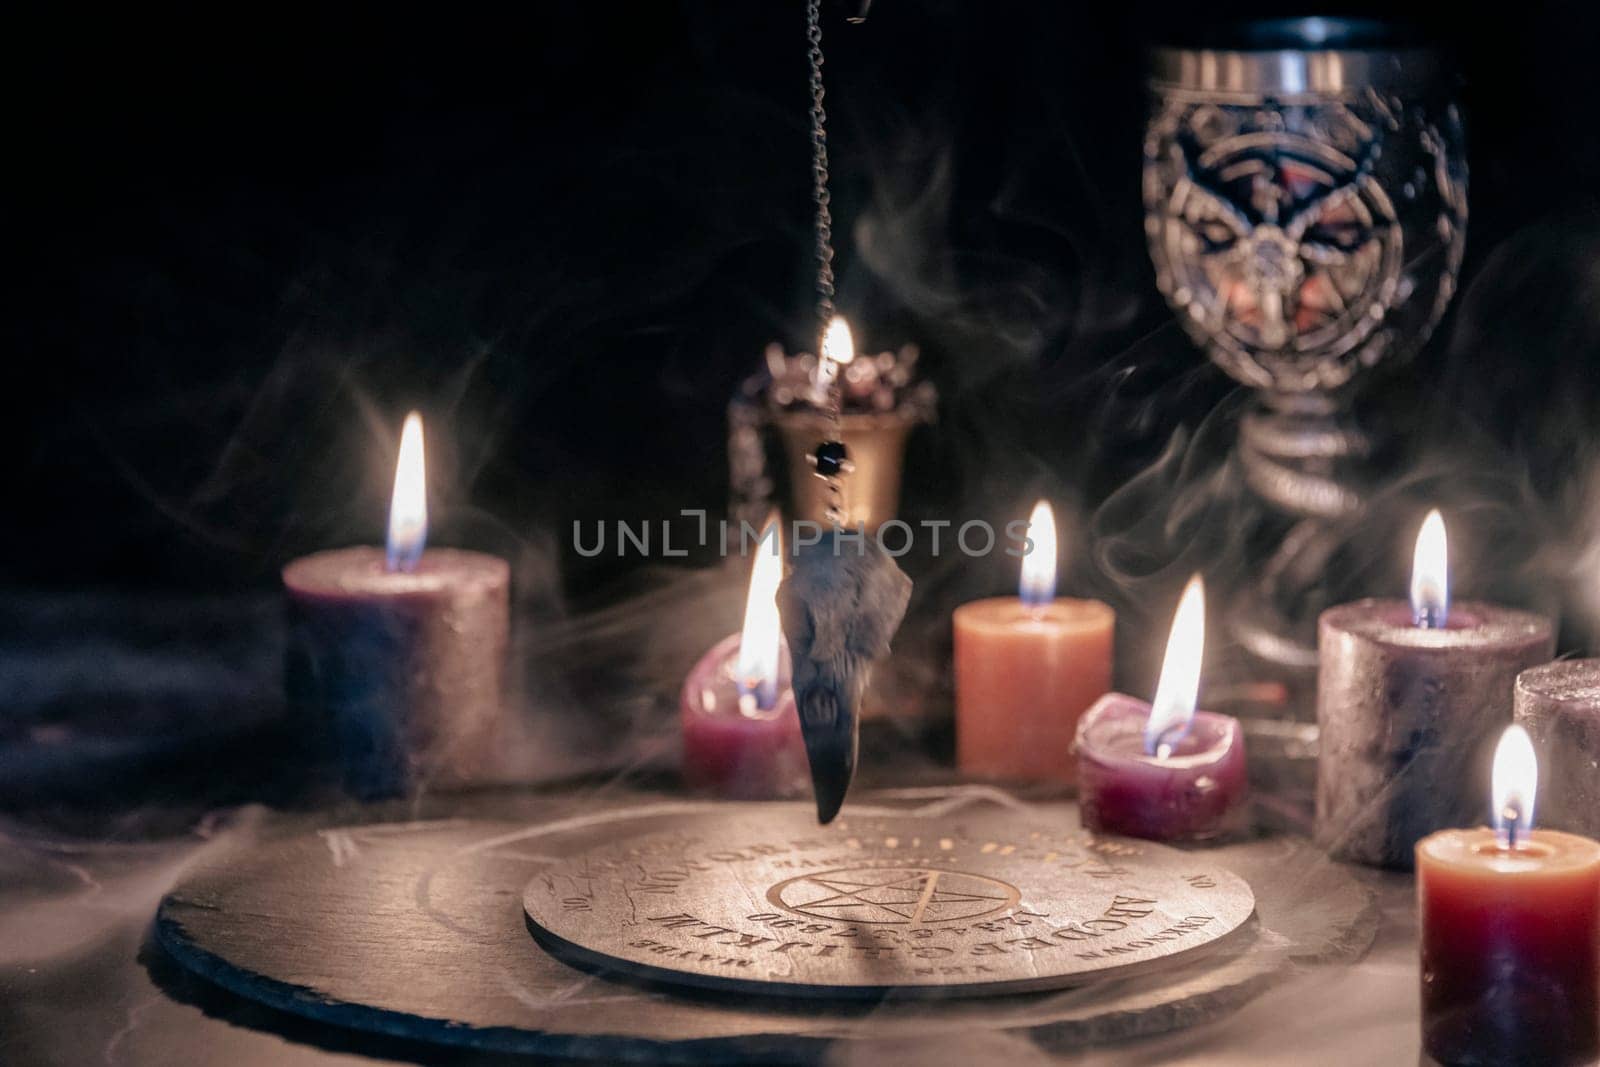 An eerie occult ritual setup featuring lit candles, a mystical symbol on slate, and a ceremonial goblet in a dark, moody setting. by jbruiz78